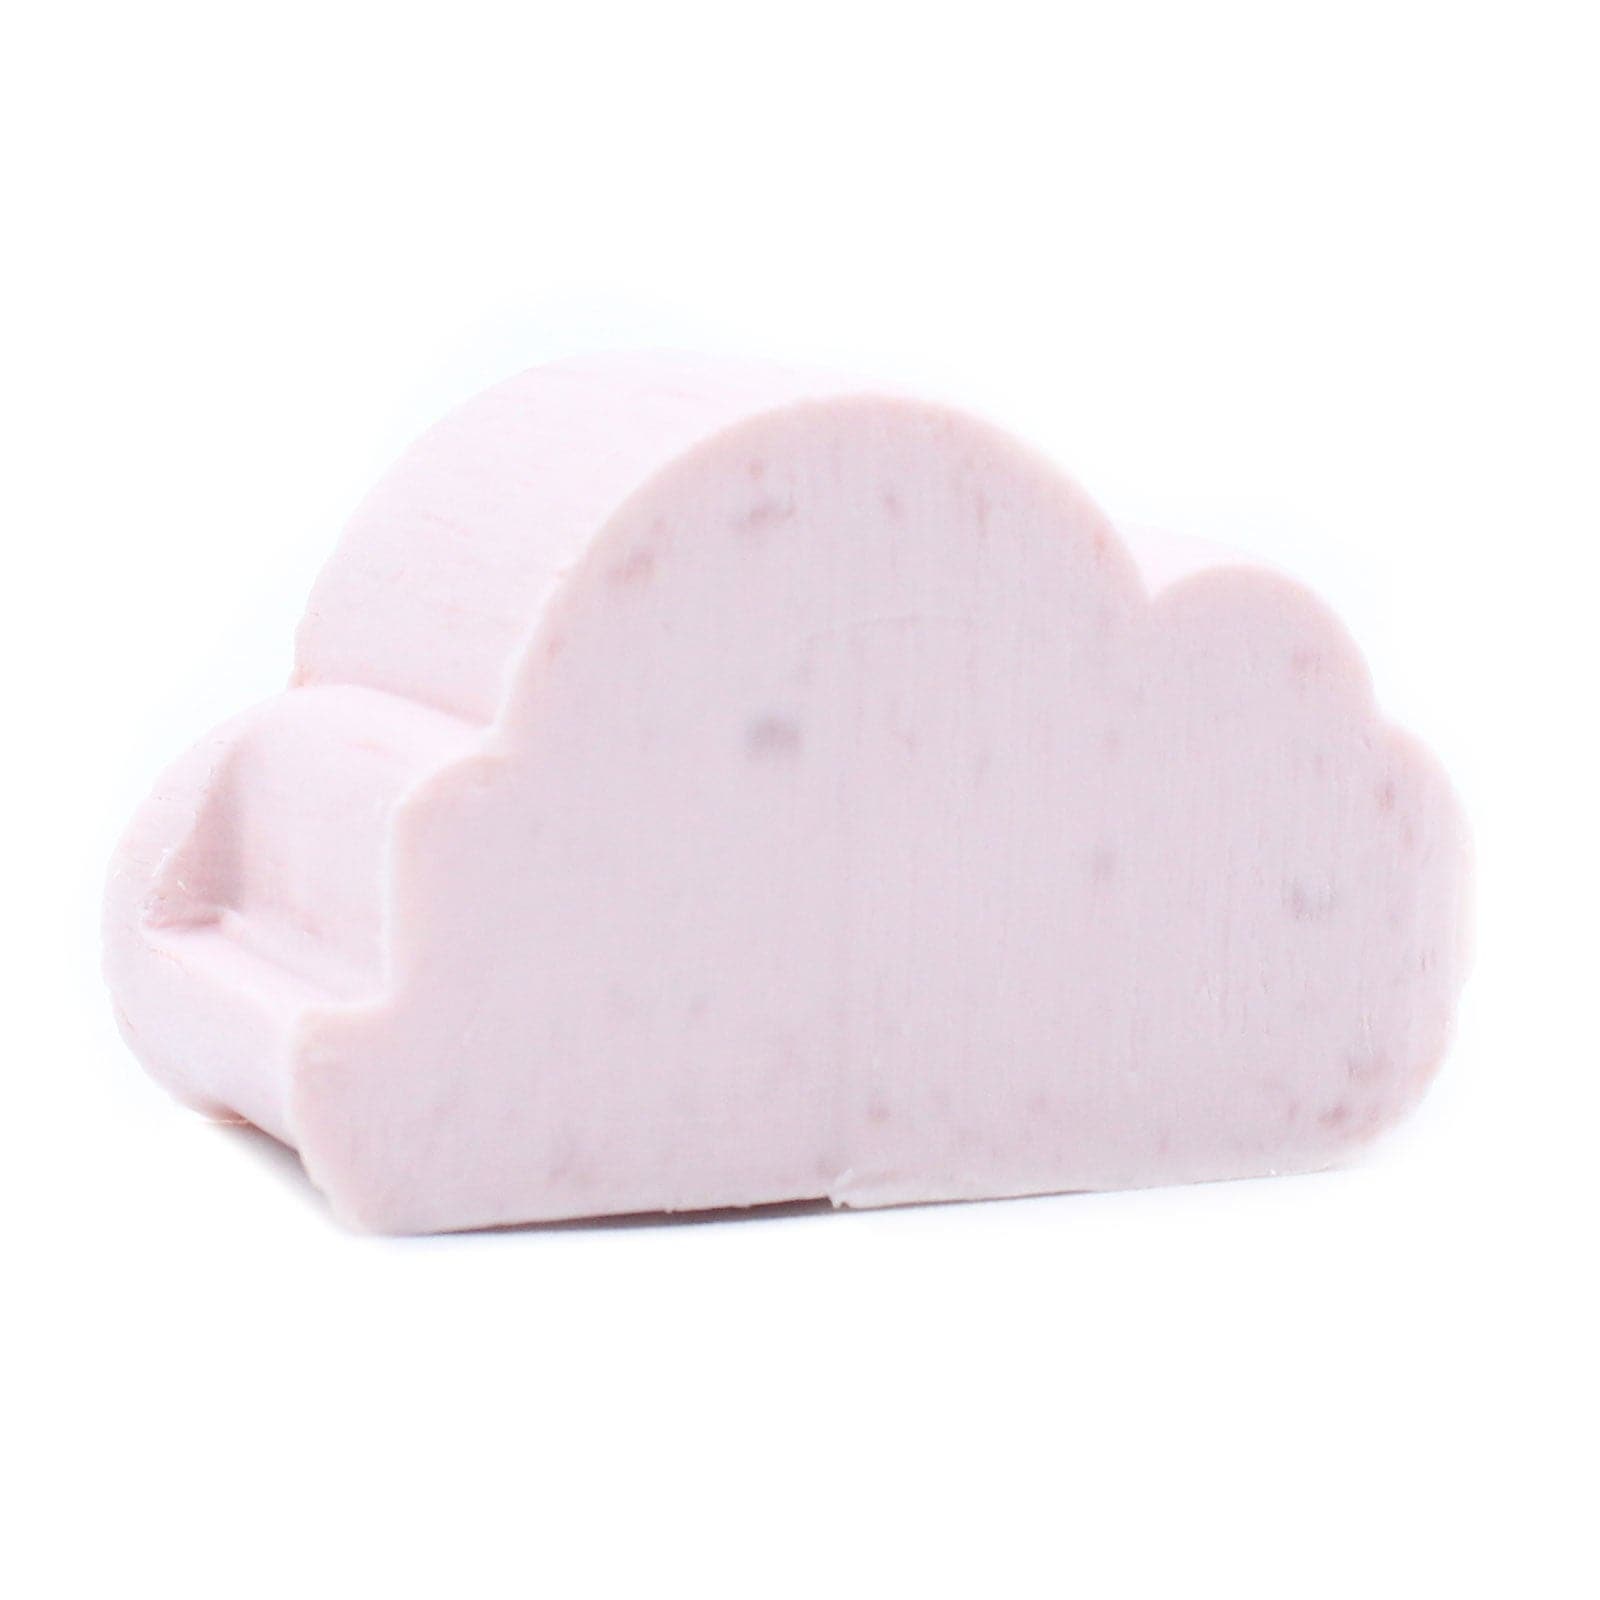 Pink Cloud Guest Soap - Marshmallow - best price from Maltashopper.com AWGSOAP-17